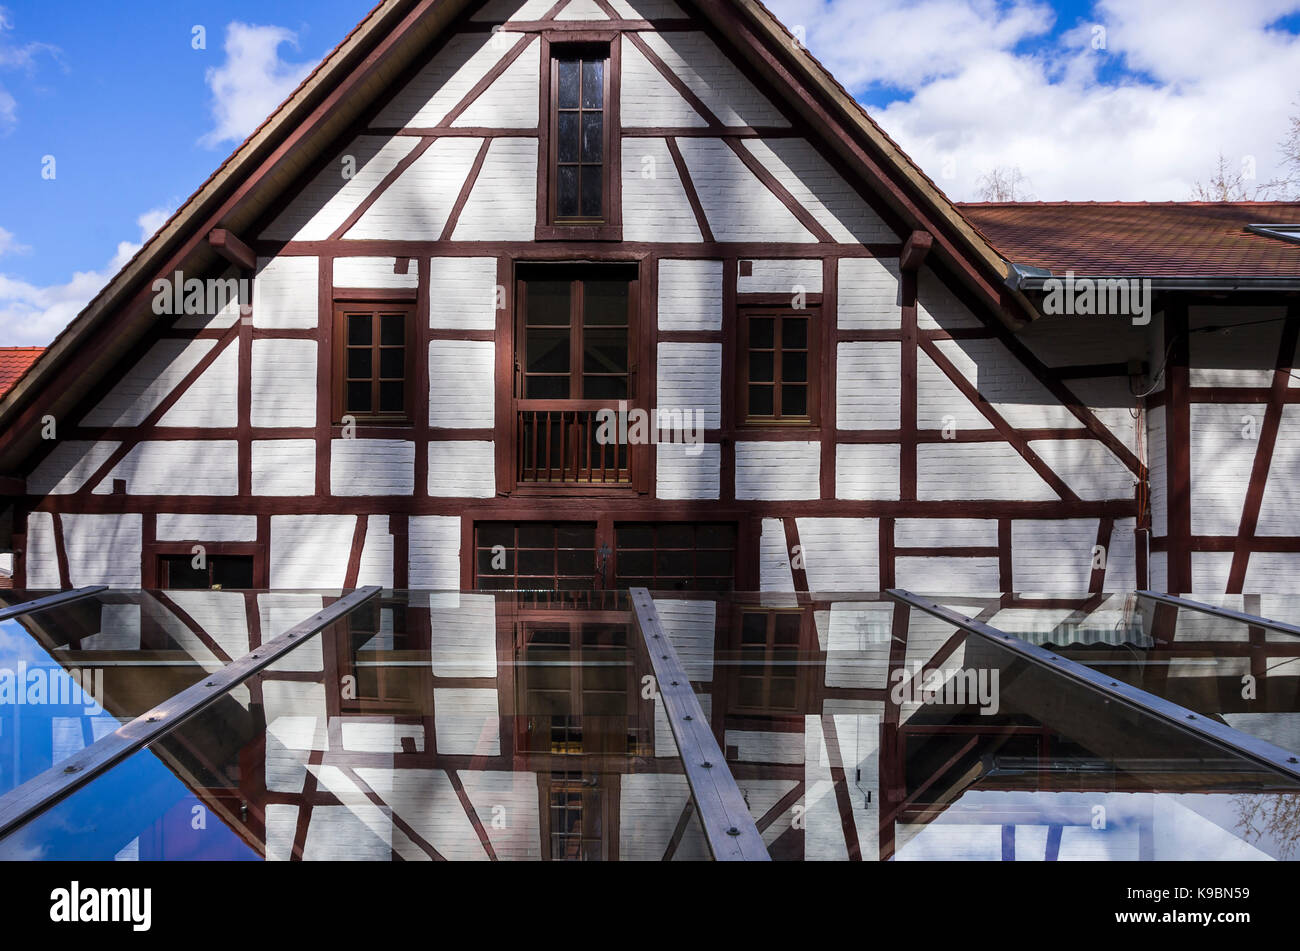 Historic house in half-timbered construction, Alte Hammerschmiede in Zwiefalten, Baden-Wurttemberg, Germany. Stock Photo